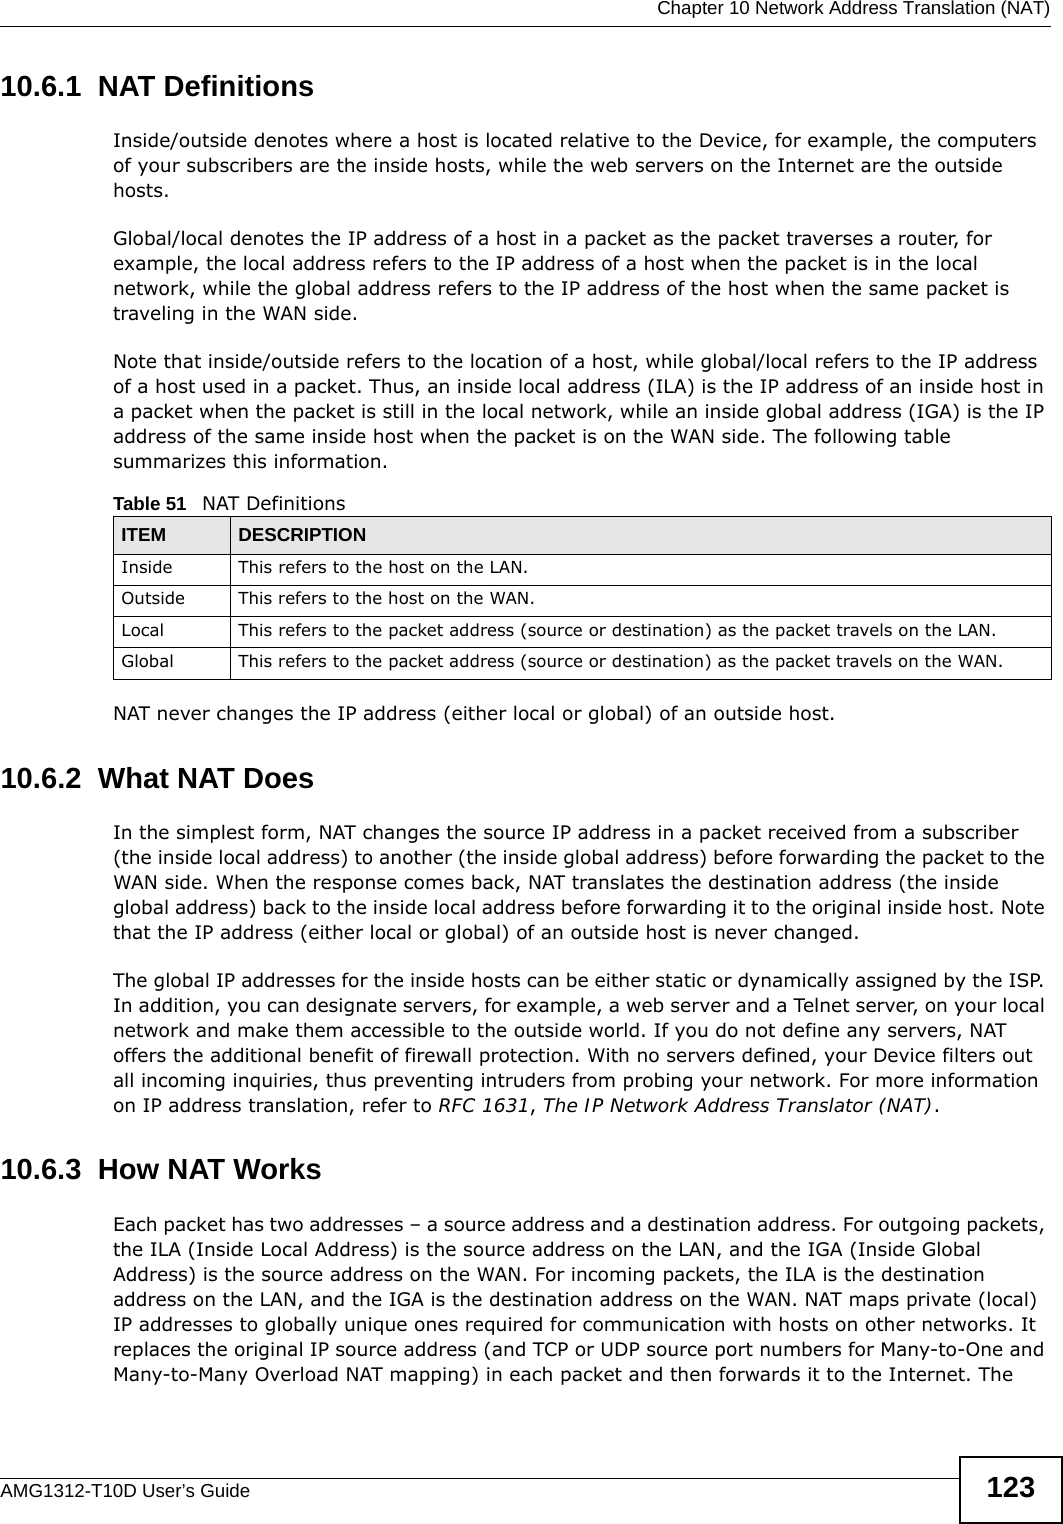  Chapter 10 Network Address Translation (NAT)AMG1312-T10D User’s Guide 12310.6.1  NAT DefinitionsInside/outside denotes where a host is located relative to the Device, for example, the computers of your subscribers are the inside hosts, while the web servers on the Internet are the outside hosts. Global/local denotes the IP address of a host in a packet as the packet traverses a router, for example, the local address refers to the IP address of a host when the packet is in the local network, while the global address refers to the IP address of the host when the same packet is traveling in the WAN side. Note that inside/outside refers to the location of a host, while global/local refers to the IP address of a host used in a packet. Thus, an inside local address (ILA) is the IP address of an inside host in a packet when the packet is still in the local network, while an inside global address (IGA) is the IP address of the same inside host when the packet is on the WAN side. The following table summarizes this information.NAT never changes the IP address (either local or global) of an outside host.10.6.2  What NAT DoesIn the simplest form, NAT changes the source IP address in a packet received from a subscriber (the inside local address) to another (the inside global address) before forwarding the packet to the WAN side. When the response comes back, NAT translates the destination address (the inside global address) back to the inside local address before forwarding it to the original inside host. Note that the IP address (either local or global) of an outside host is never changed.The global IP addresses for the inside hosts can be either static or dynamically assigned by the ISP. In addition, you can designate servers, for example, a web server and a Telnet server, on your local network and make them accessible to the outside world. If you do not define any servers, NAT offers the additional benefit of firewall protection. With no servers defined, your Device filters out all incoming inquiries, thus preventing intruders from probing your network. For more information on IP address translation, refer to RFC 1631, The IP Network Address Translator (NAT).10.6.3  How NAT WorksEach packet has two addresses – a source address and a destination address. For outgoing packets, the ILA (Inside Local Address) is the source address on the LAN, and the IGA (Inside Global Address) is the source address on the WAN. For incoming packets, the ILA is the destination address on the LAN, and the IGA is the destination address on the WAN. NAT maps private (local) IP addresses to globally unique ones required for communication with hosts on other networks. It replaces the original IP source address (and TCP or UDP source port numbers for Many-to-One and Many-to-Many Overload NAT mapping) in each packet and then forwards it to the Internet. The Table 51   NAT DefinitionsITEM DESCRIPTIONInside This refers to the host on the LAN.Outside This refers to the host on the WAN.Local This refers to the packet address (source or destination) as the packet travels on the LAN.Global This refers to the packet address (source or destination) as the packet travels on the WAN.